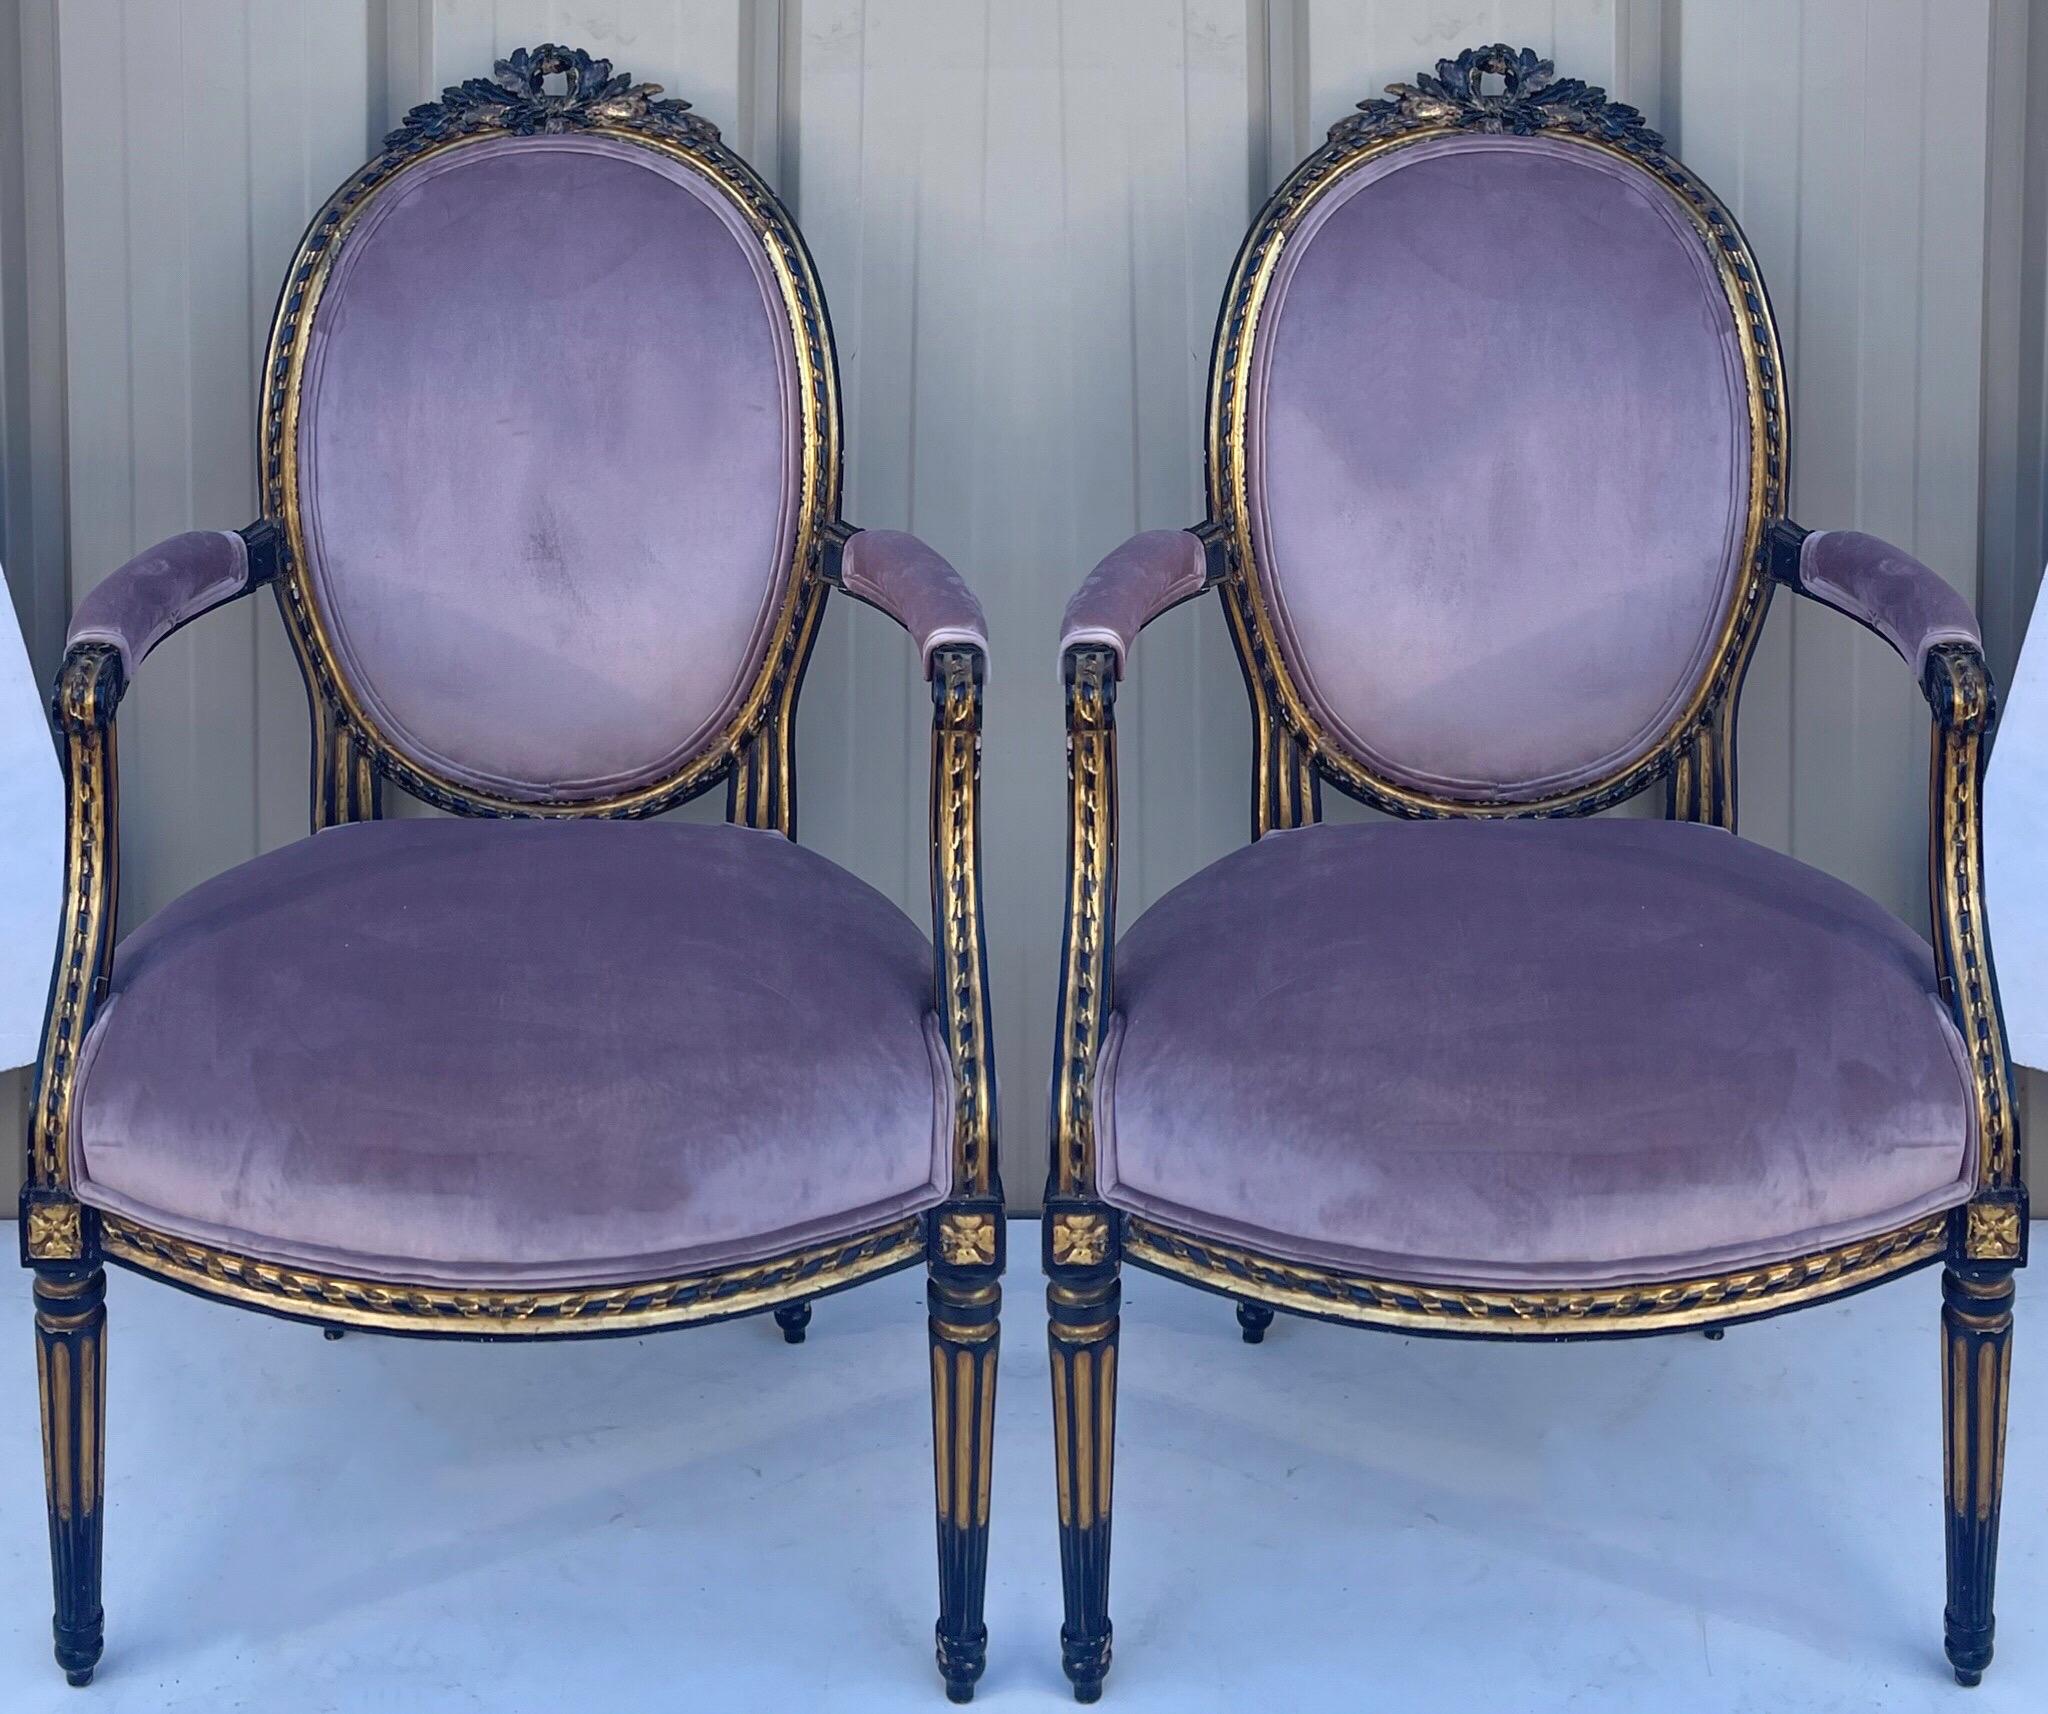 French Louis XIV Style Ebonized and Parcel-Gilt Bergère Chairs, a Pair In Good Condition For Sale In Kennesaw, GA